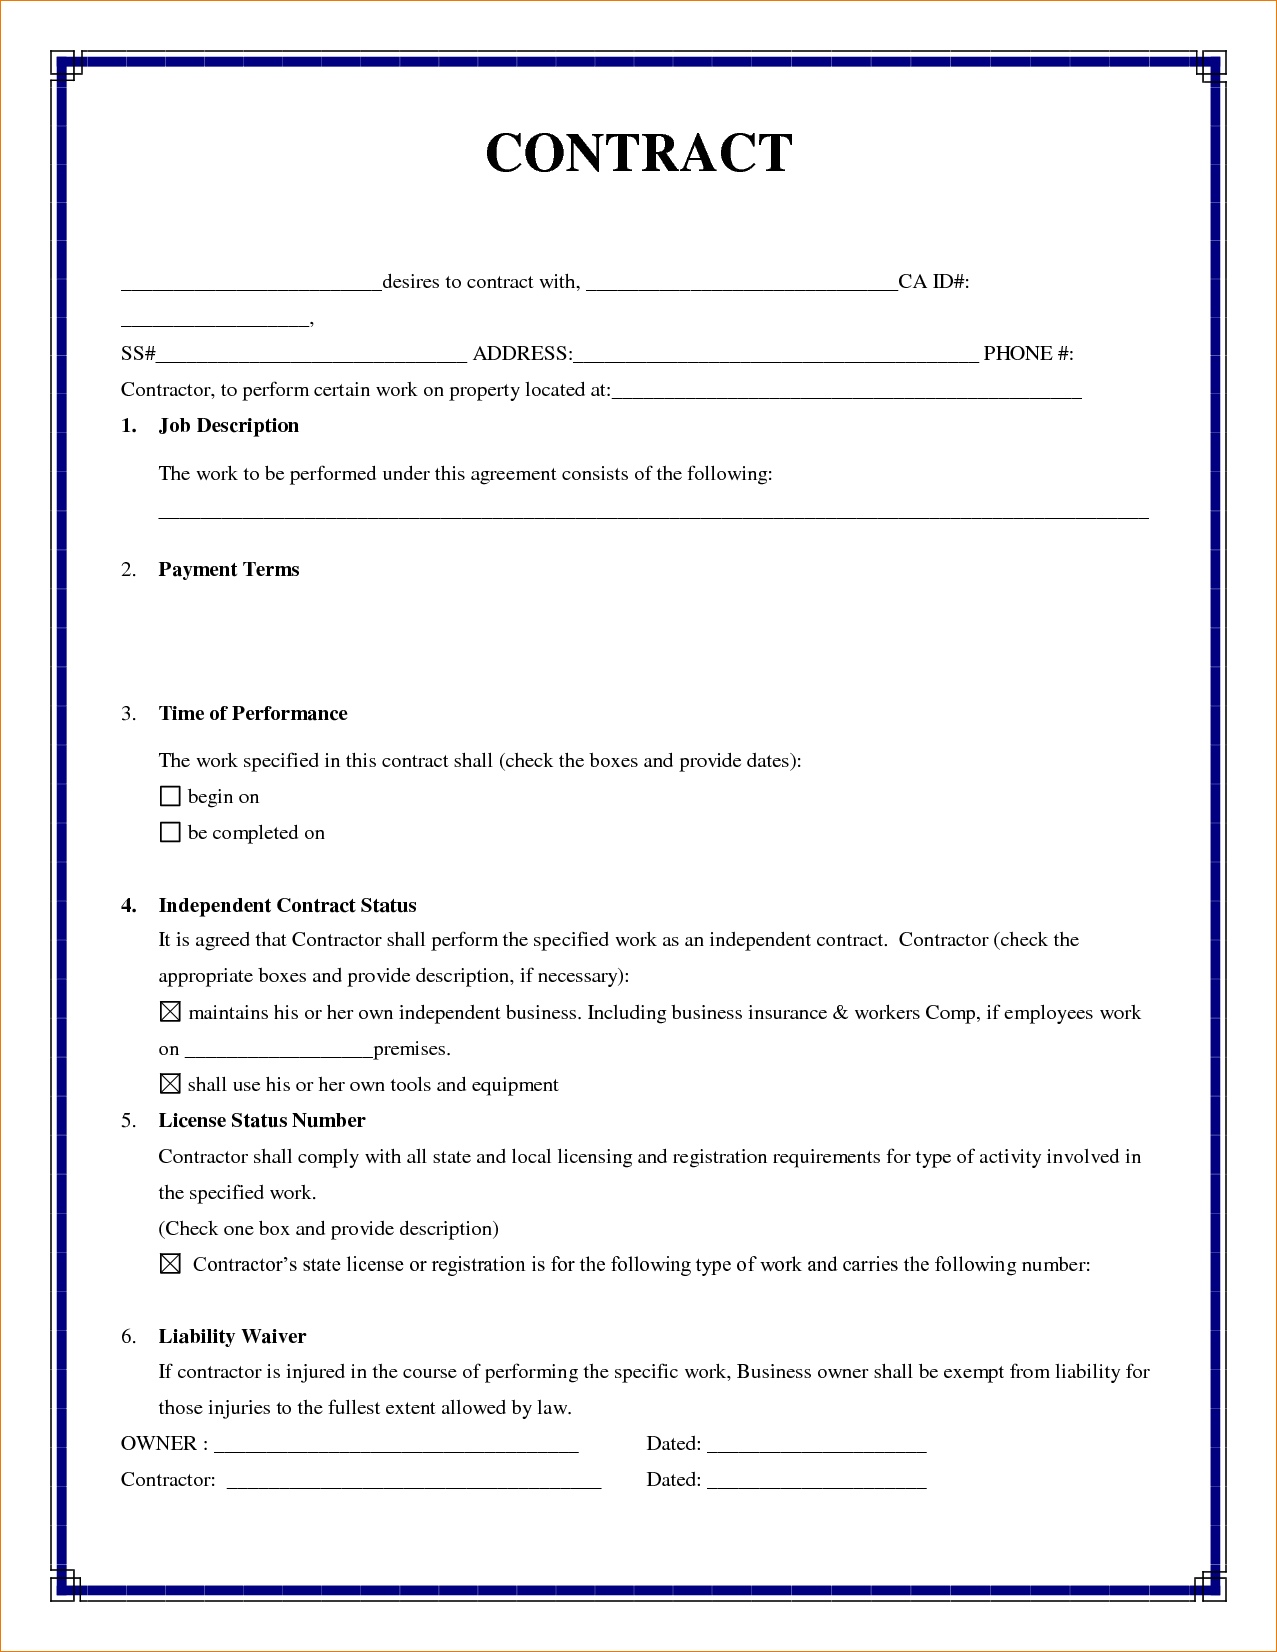 Contract Agreement Pdf New 7 Simple Contractor Agreement Pu 